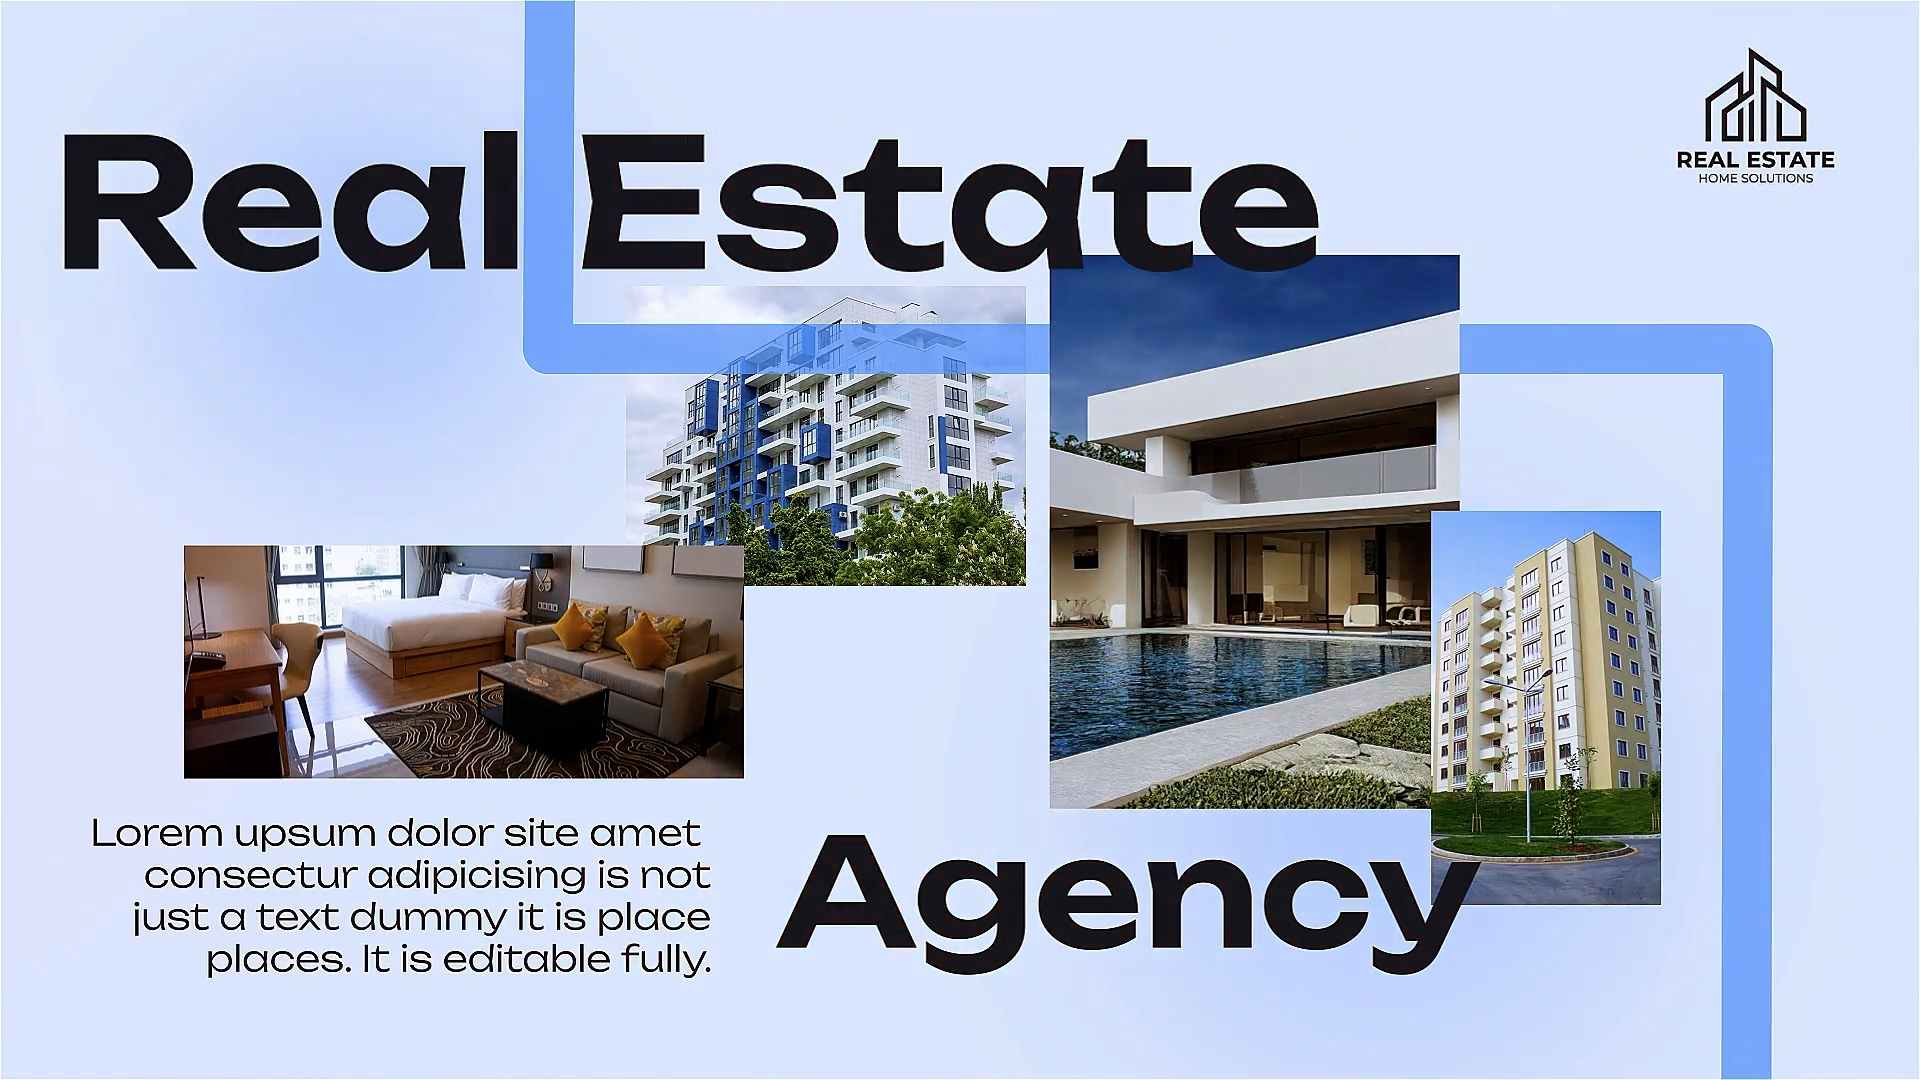 Real Estate - Original Presentation 49701747 Videohive - Free Download After Effects Template After Effects CC, CS6 | No Plugin | 1920x1080 | 7 MB